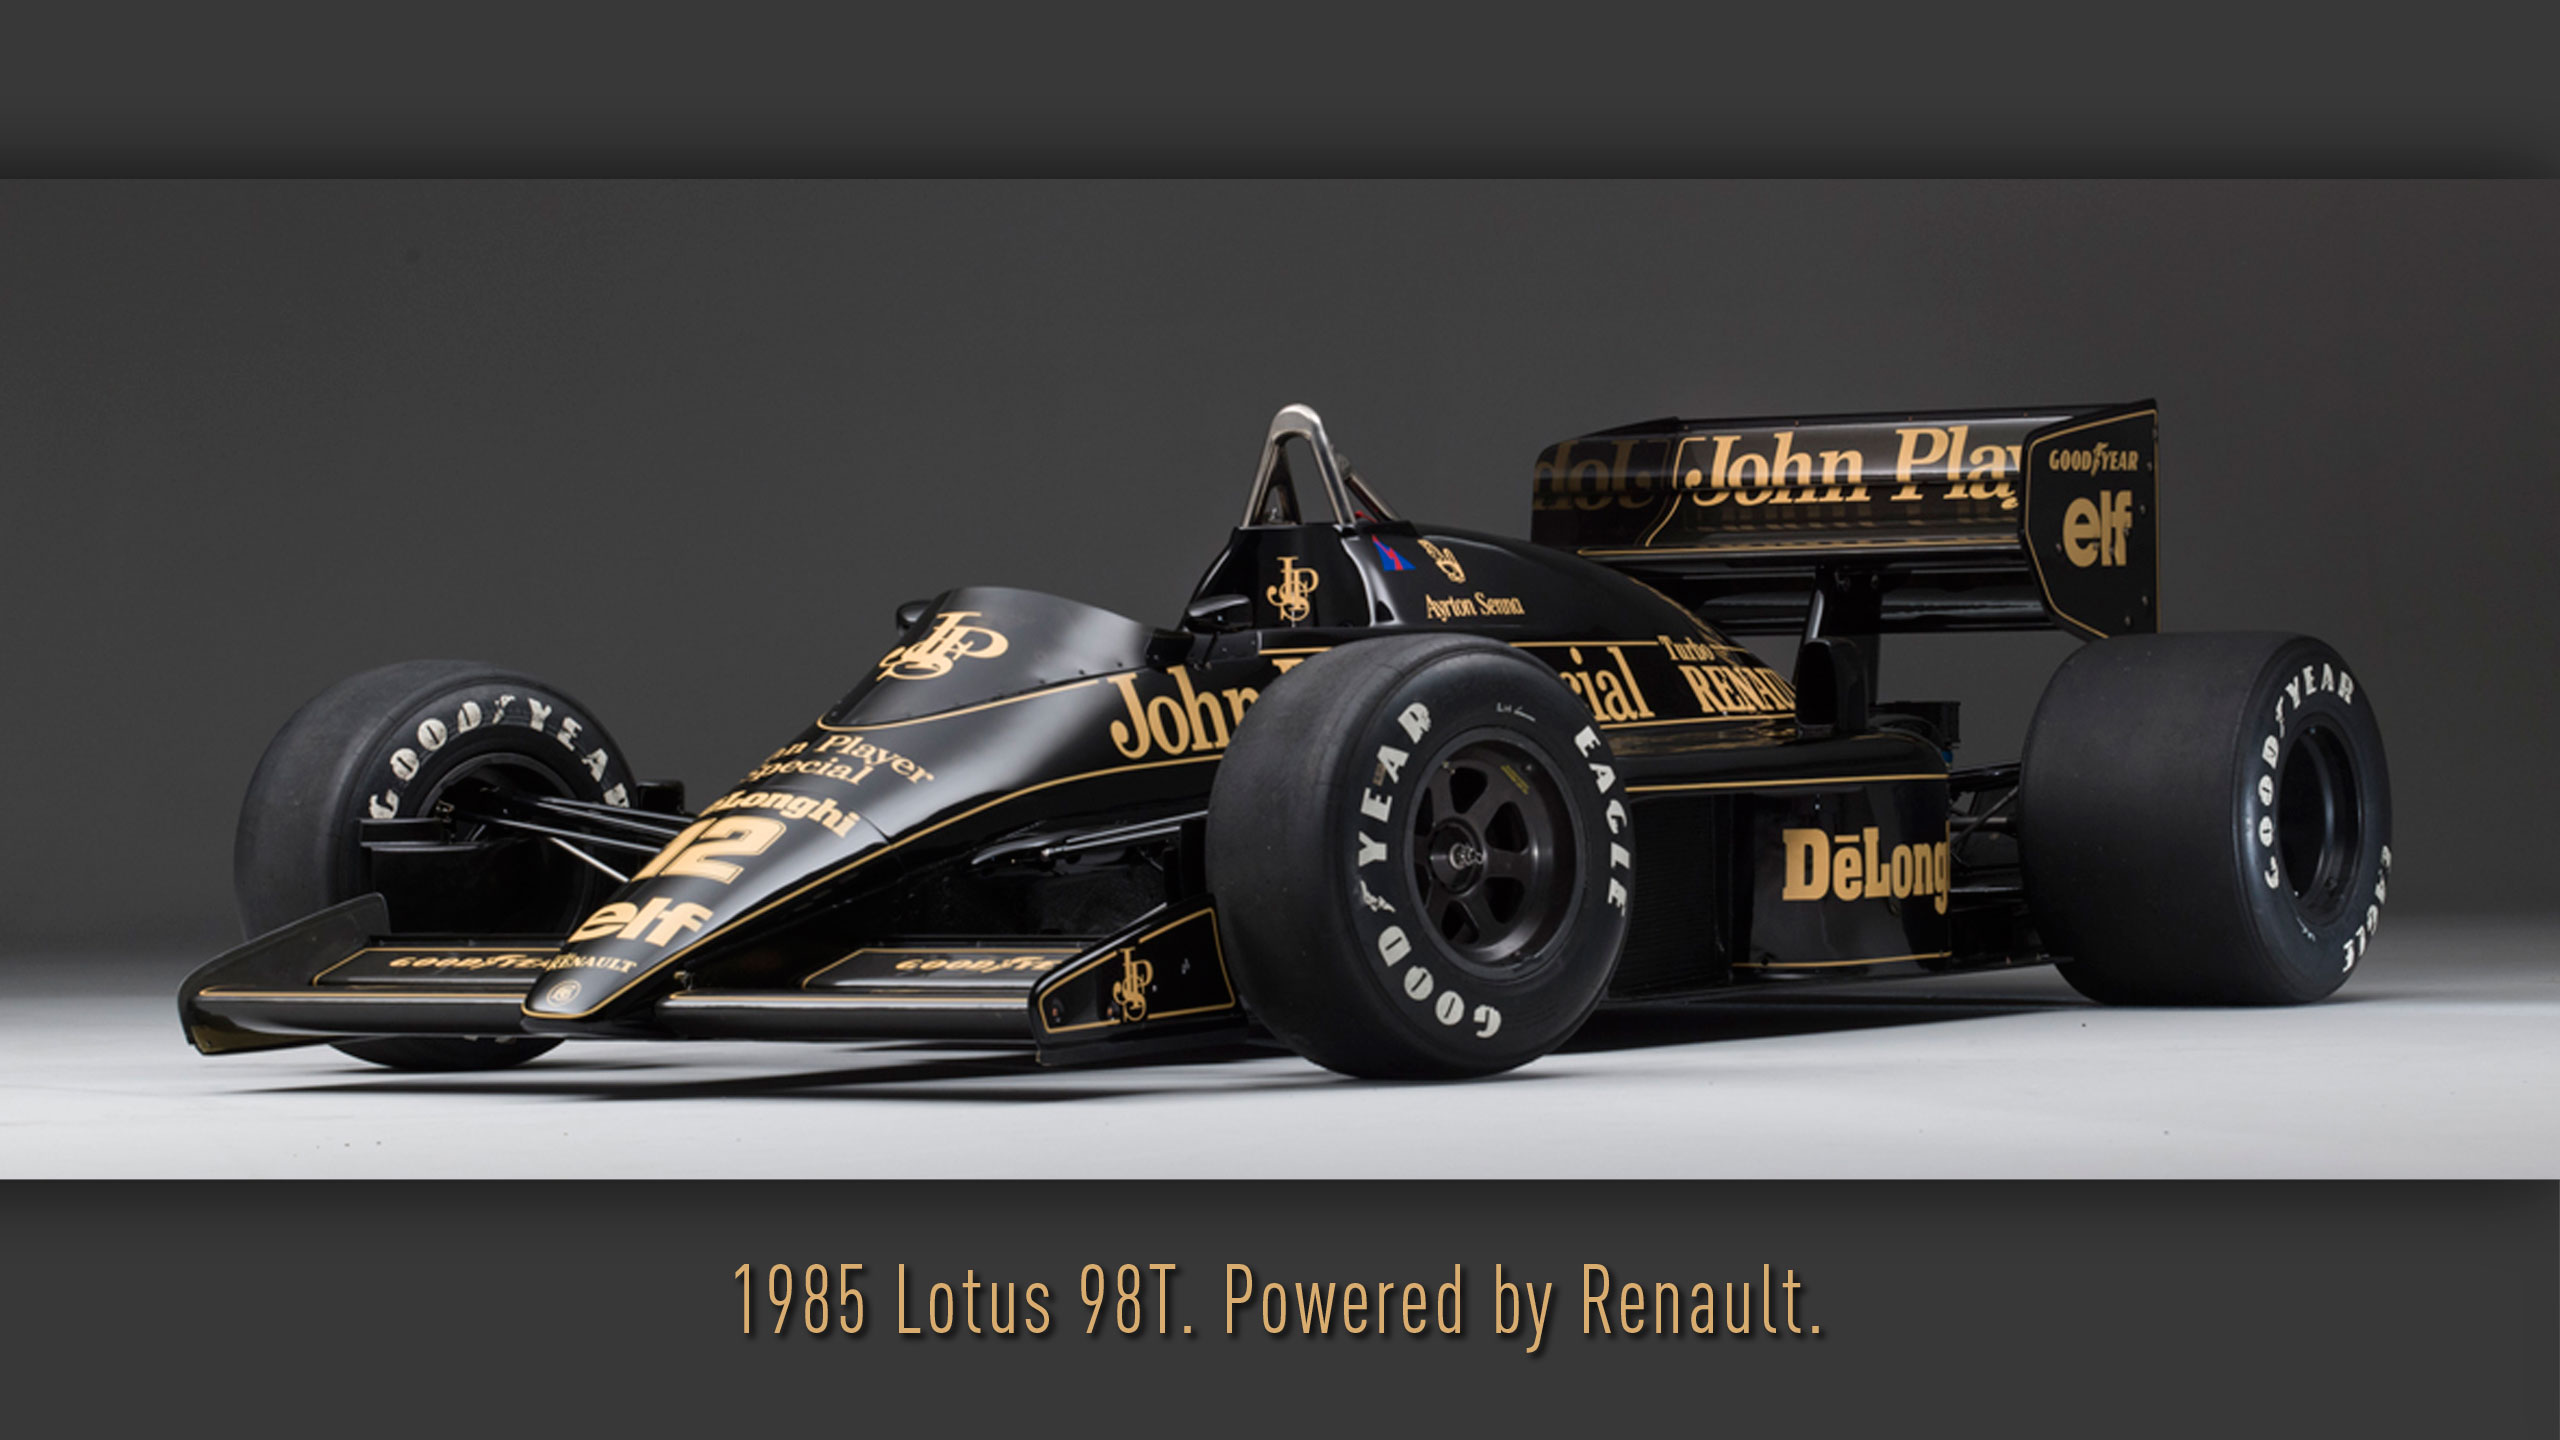 I made a wallpaper of that gorgeous '85 Lotus if anyone else is interested. 2560x1440.: formula1